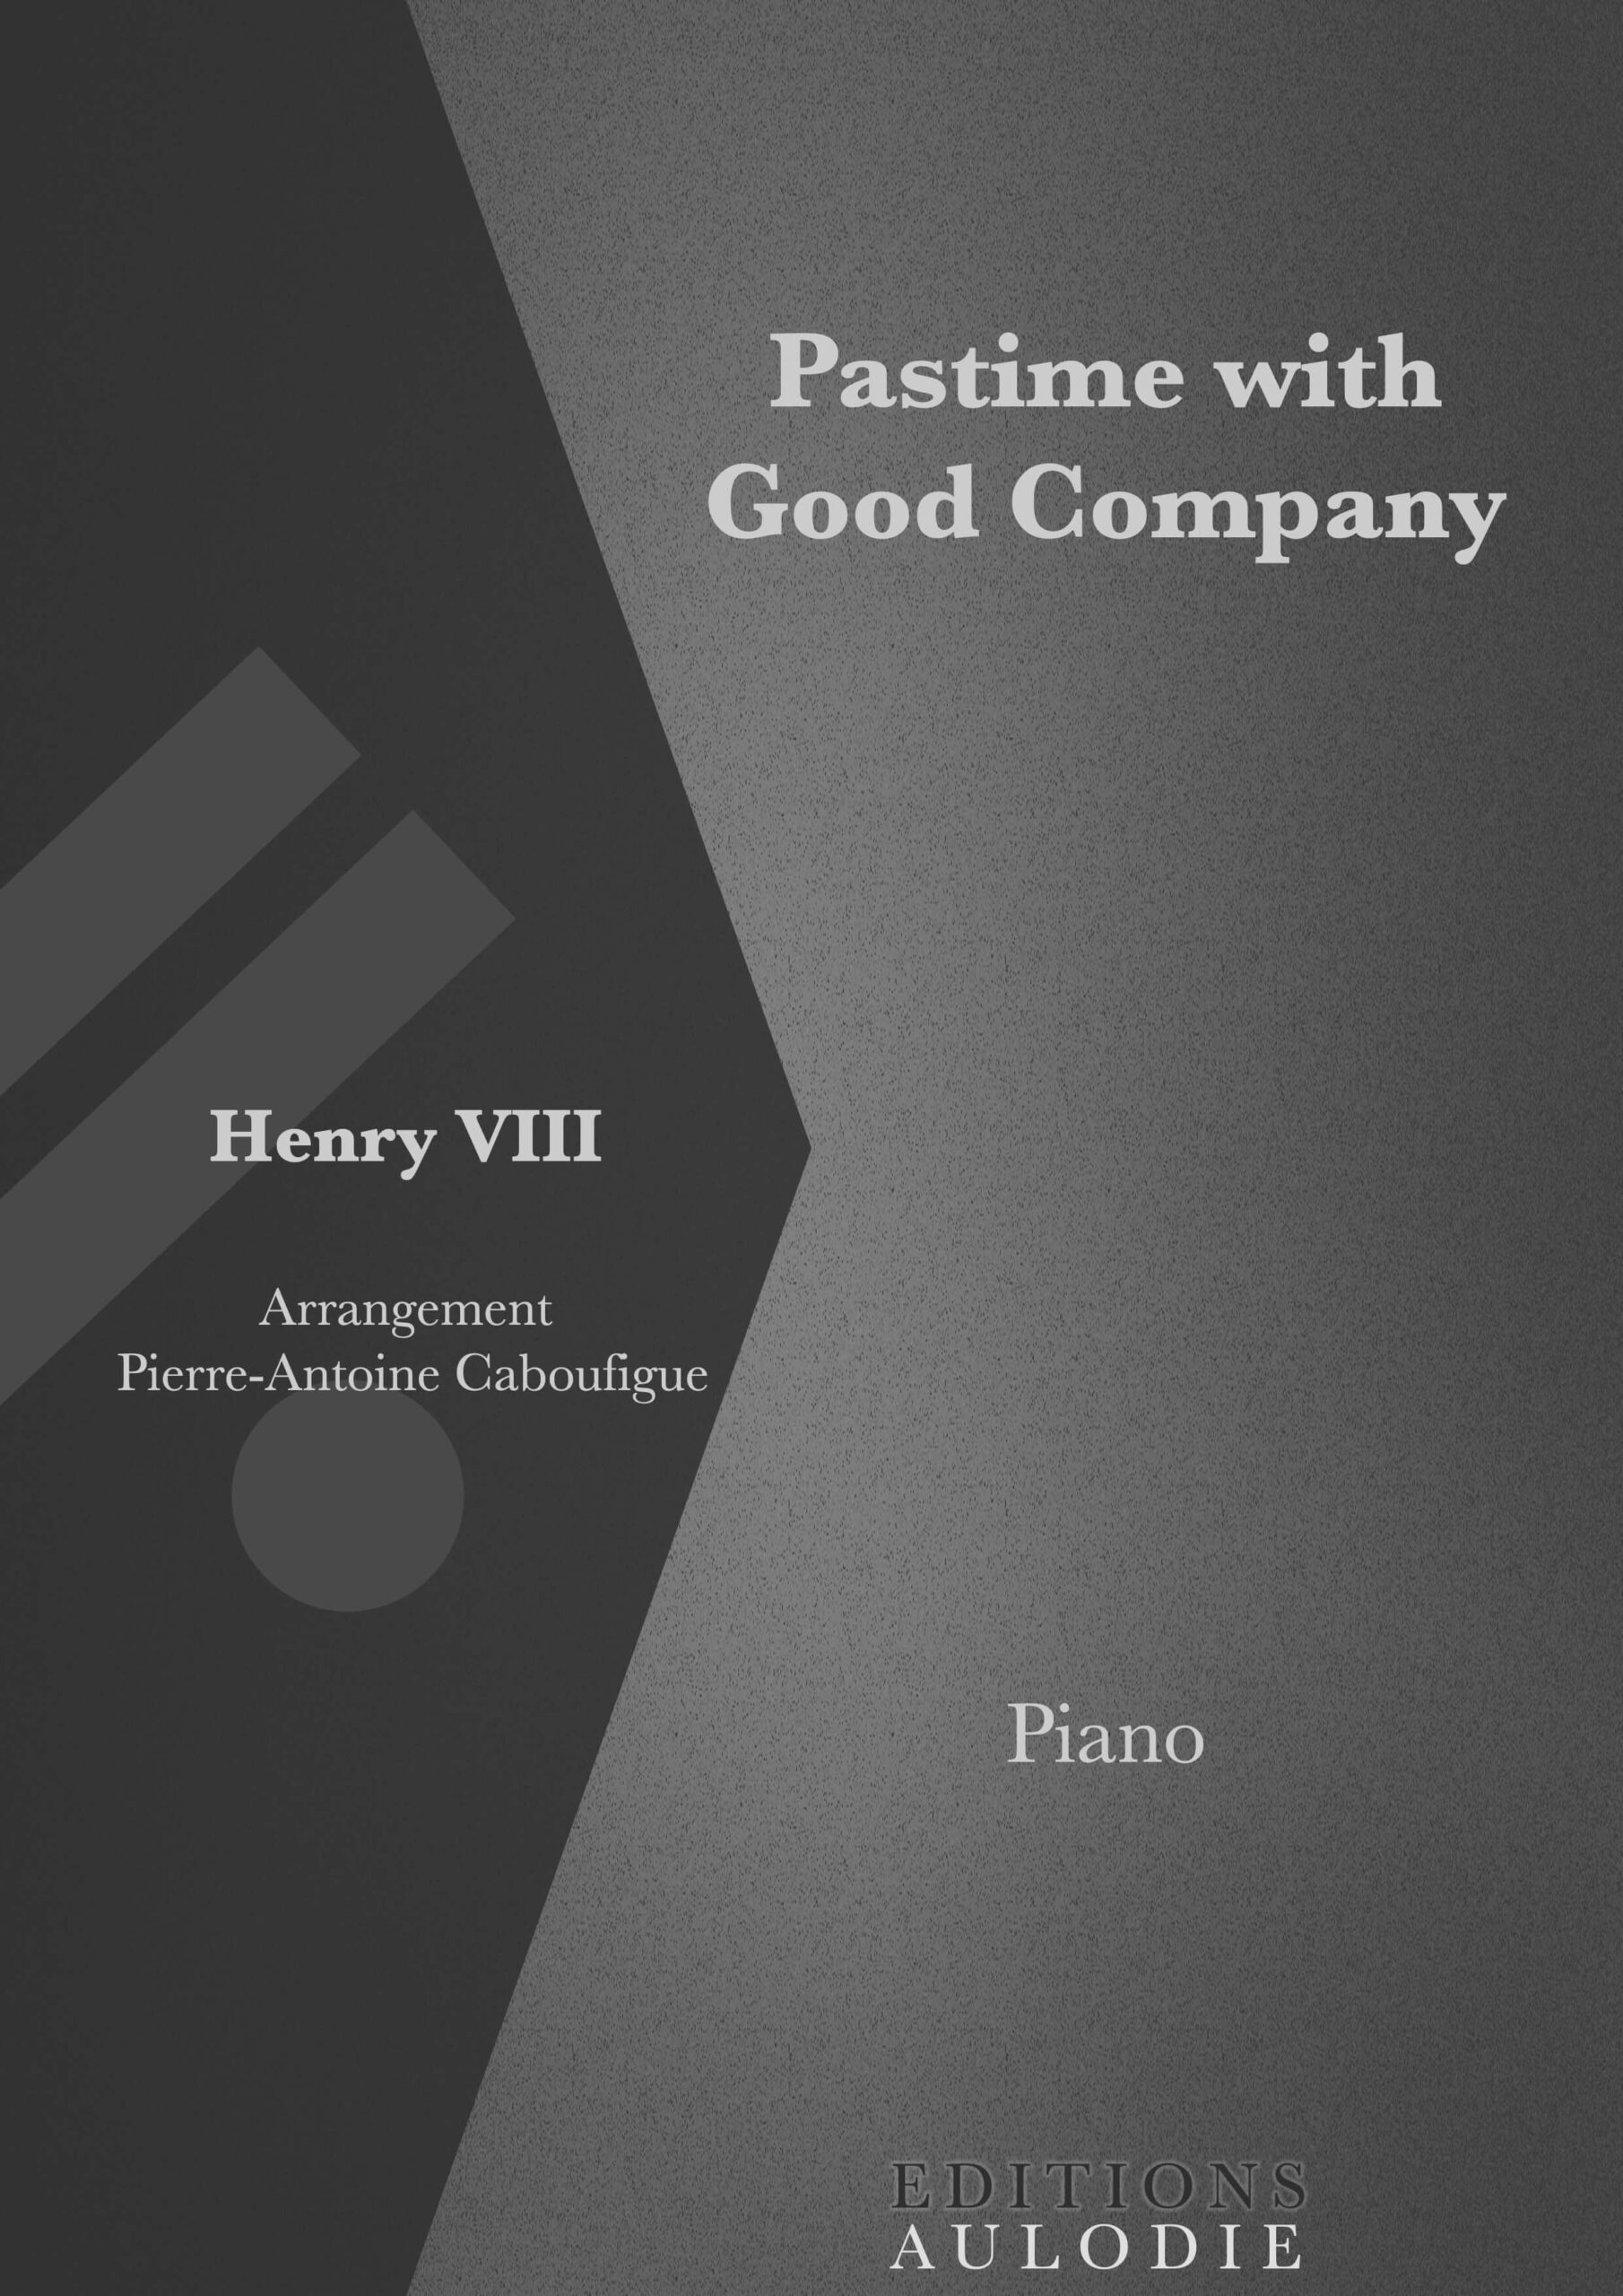 EA01013-Pastime_with_Good_Company-Henry_VIII-Solo